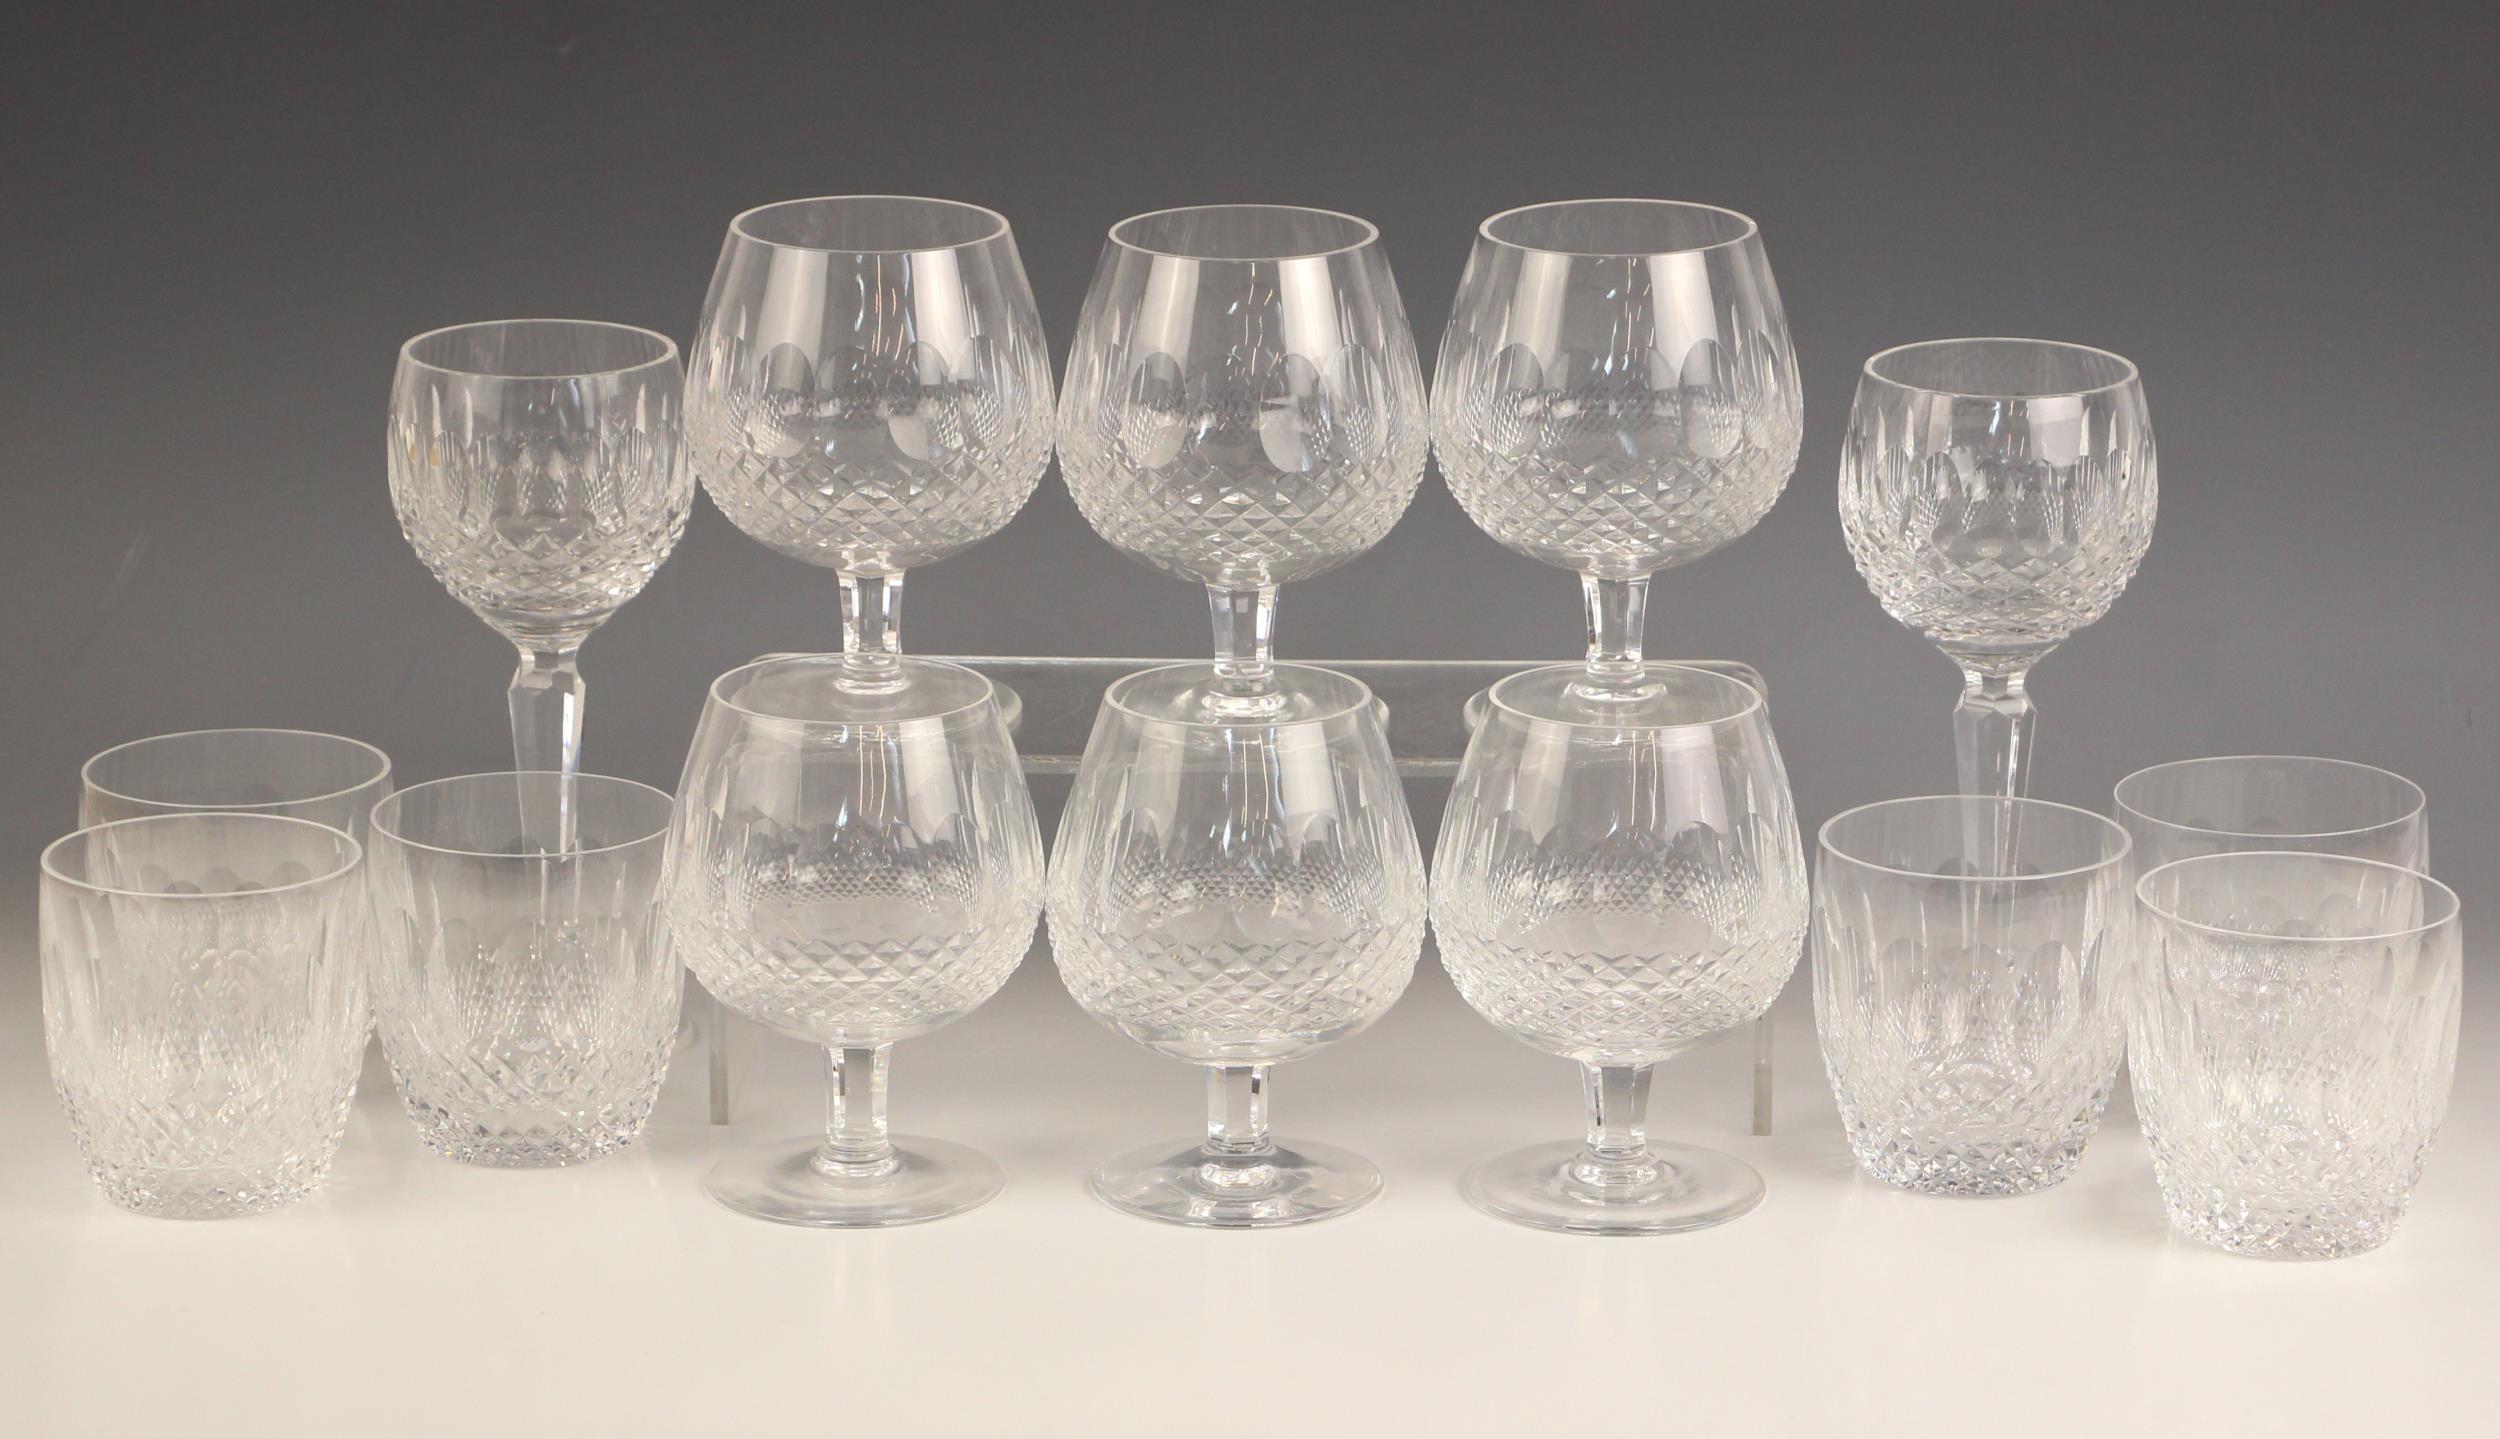 Six Waterford Crystal 'Colleen' pattern brandy balloon glasses, 13cm high, with six conforming